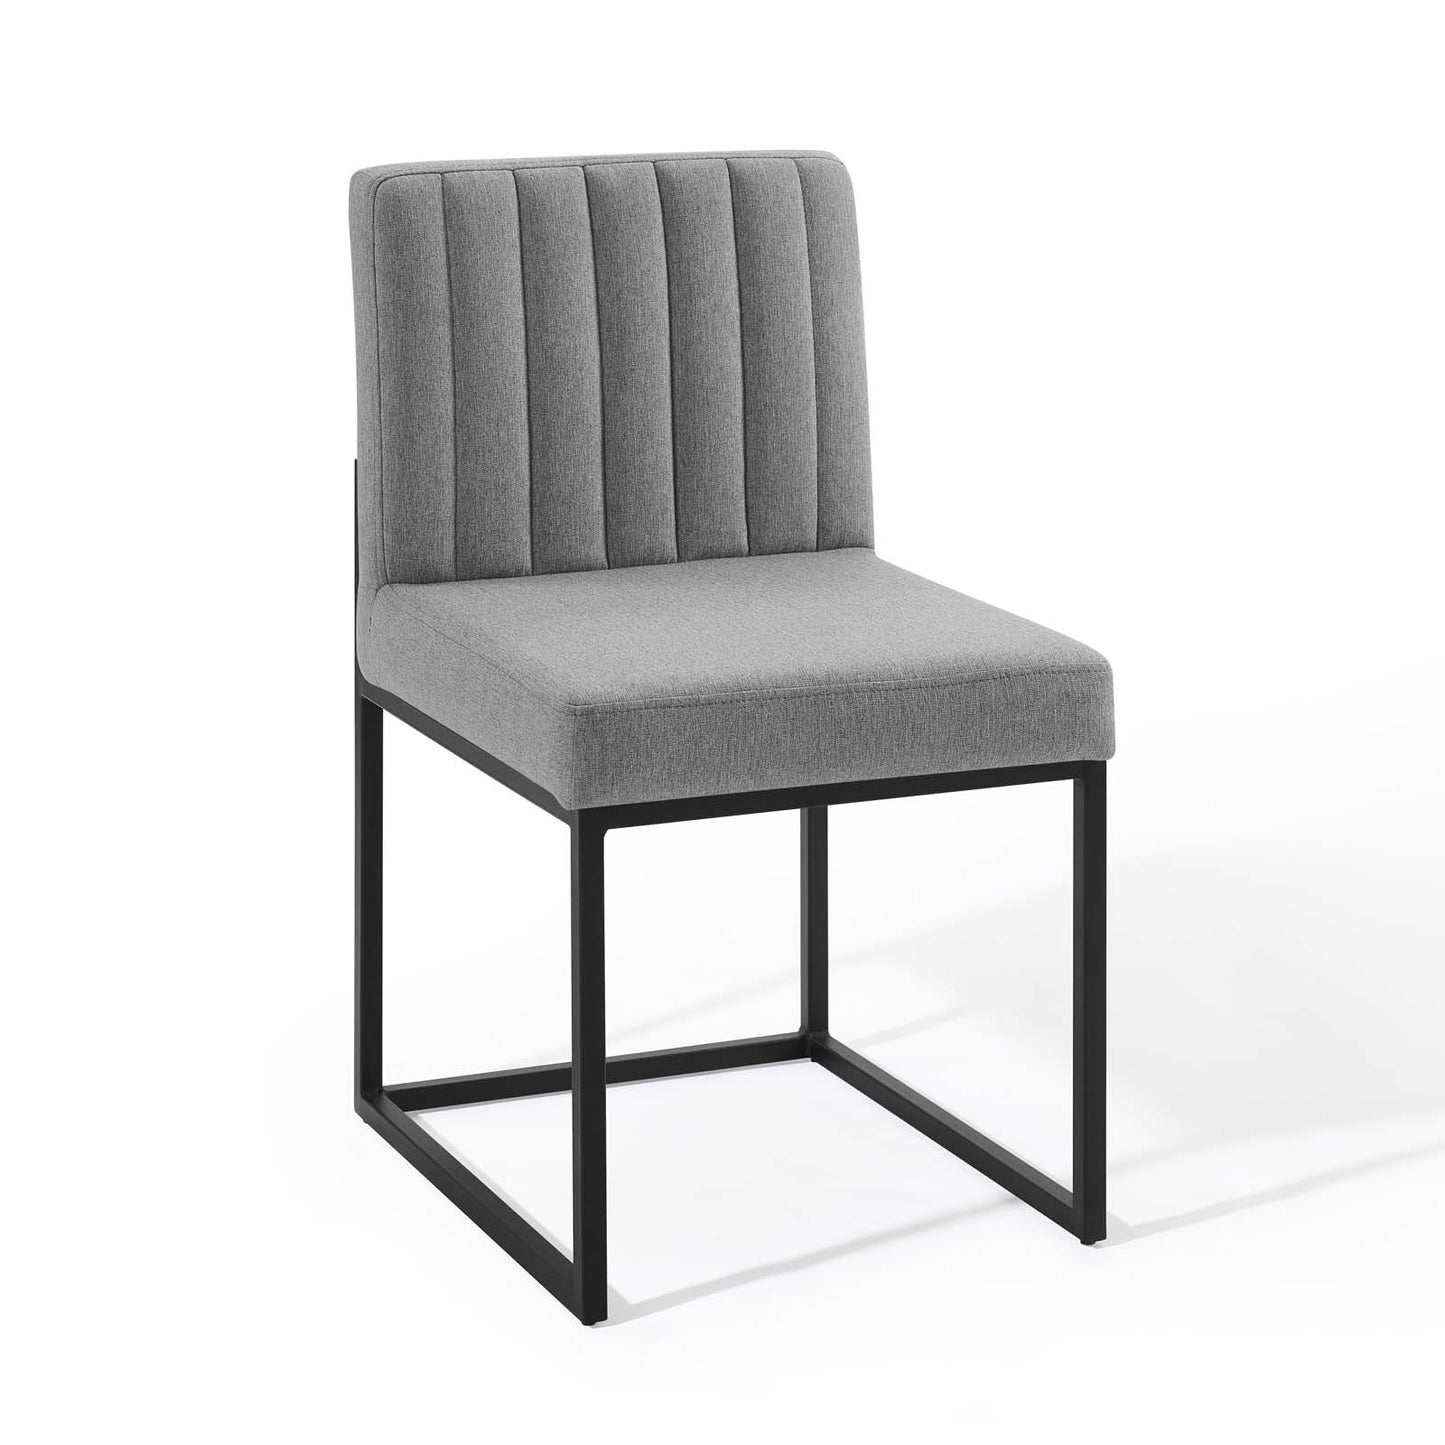 Carriage Channel Tufted Sled Base Upholstered Fabric Dining Chair Black Light Gray EEI-3807-BLK-LGR